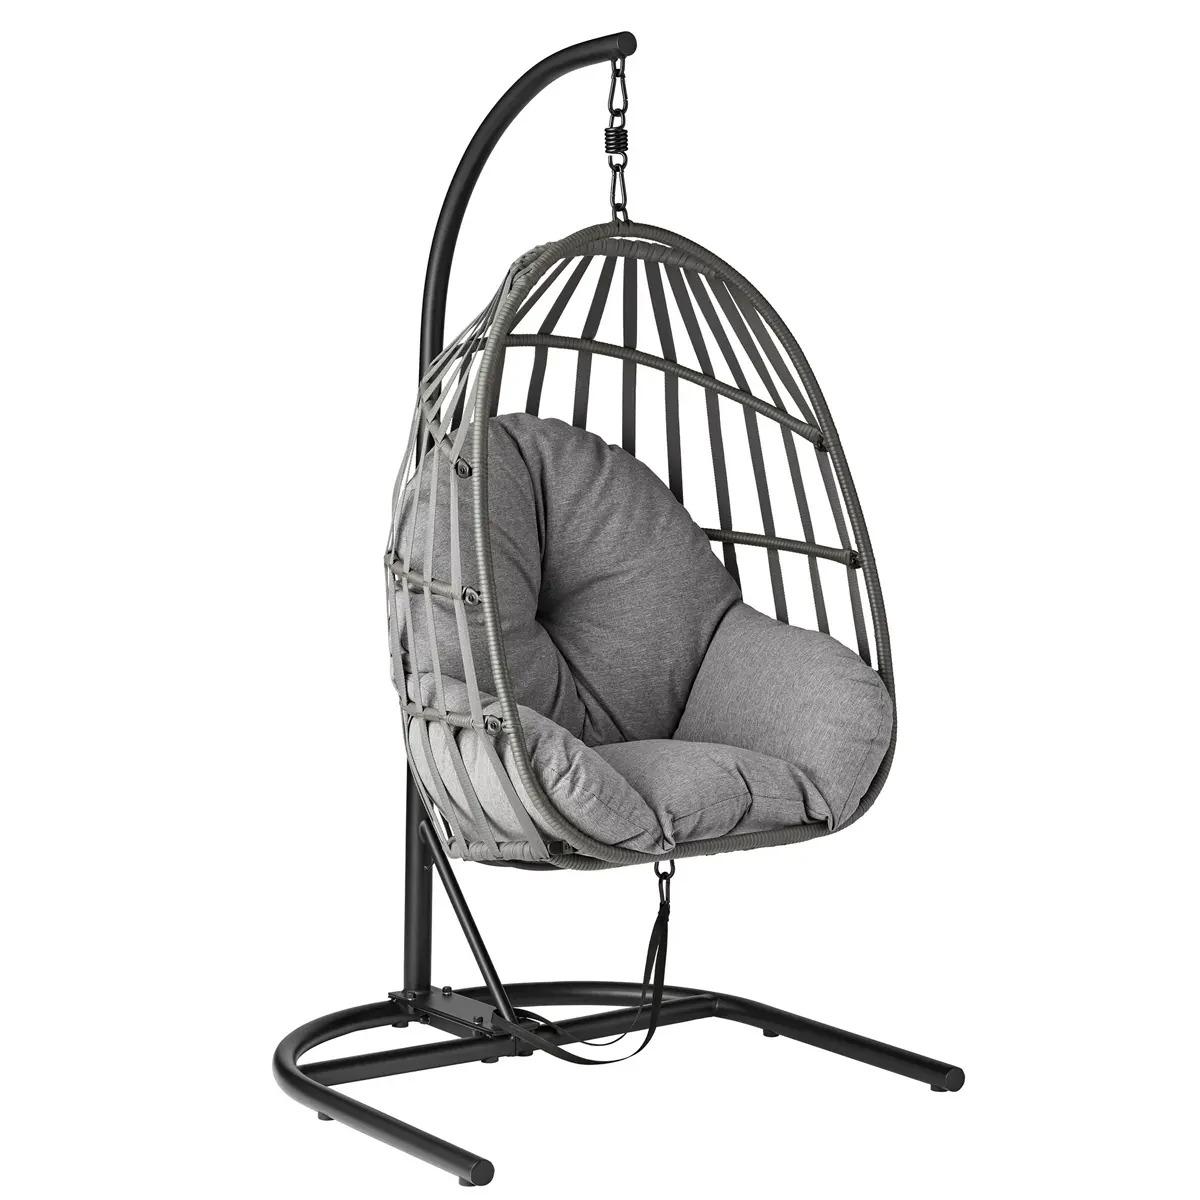 Mainstays Wicker Outdoor Patio Hanging Egg Chair for $147 Shipped